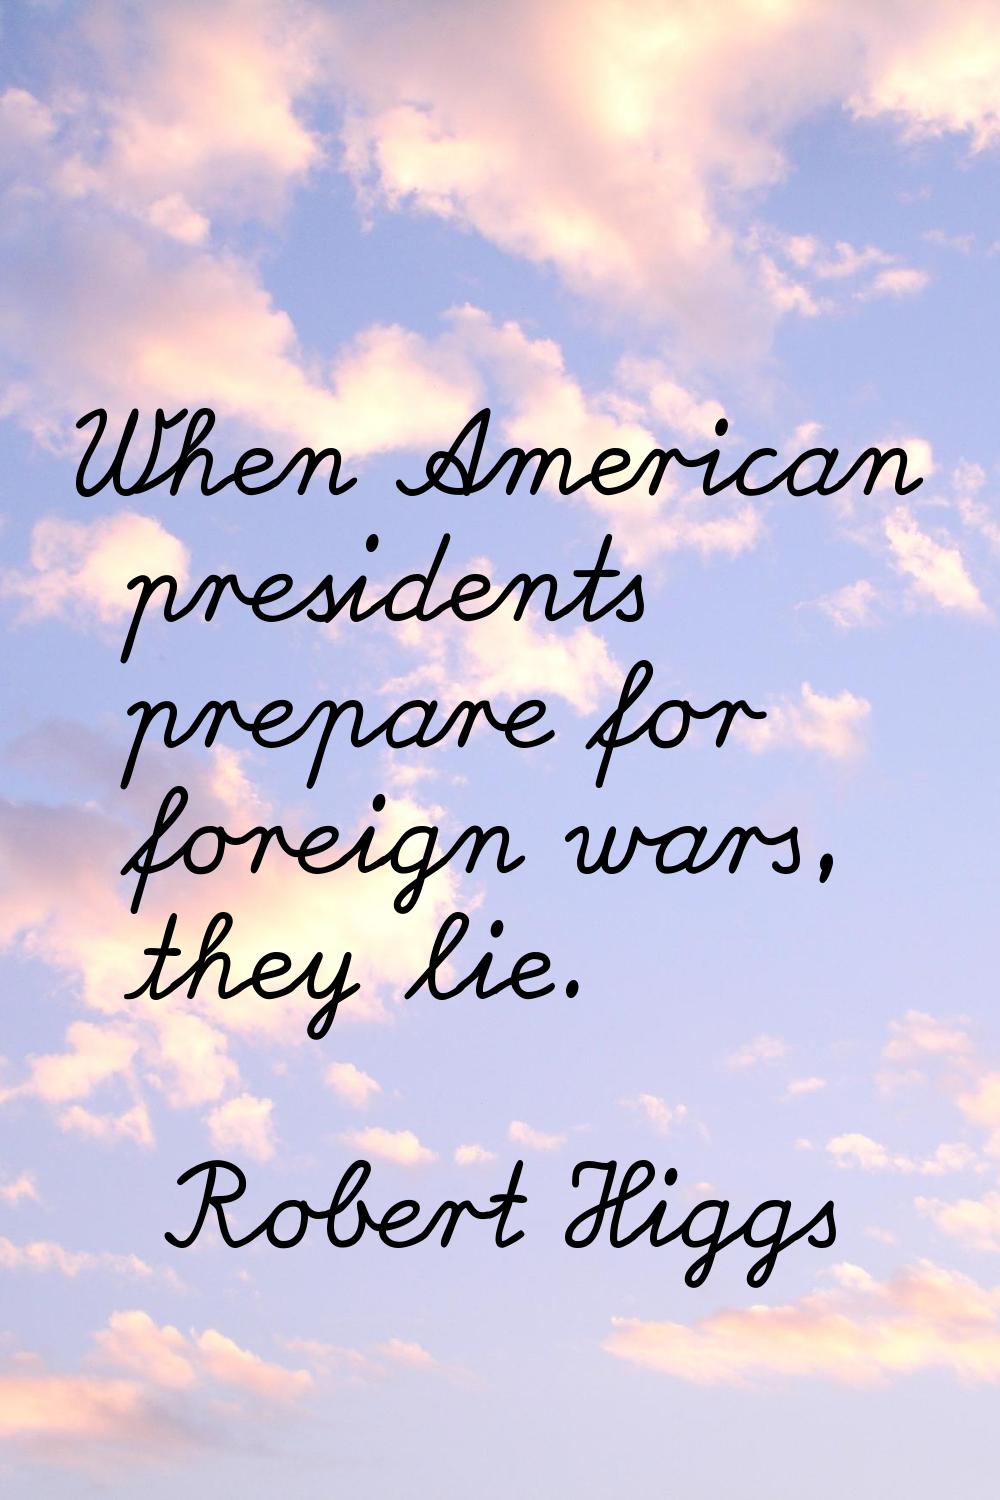 When American presidents prepare for foreign wars, they lie.